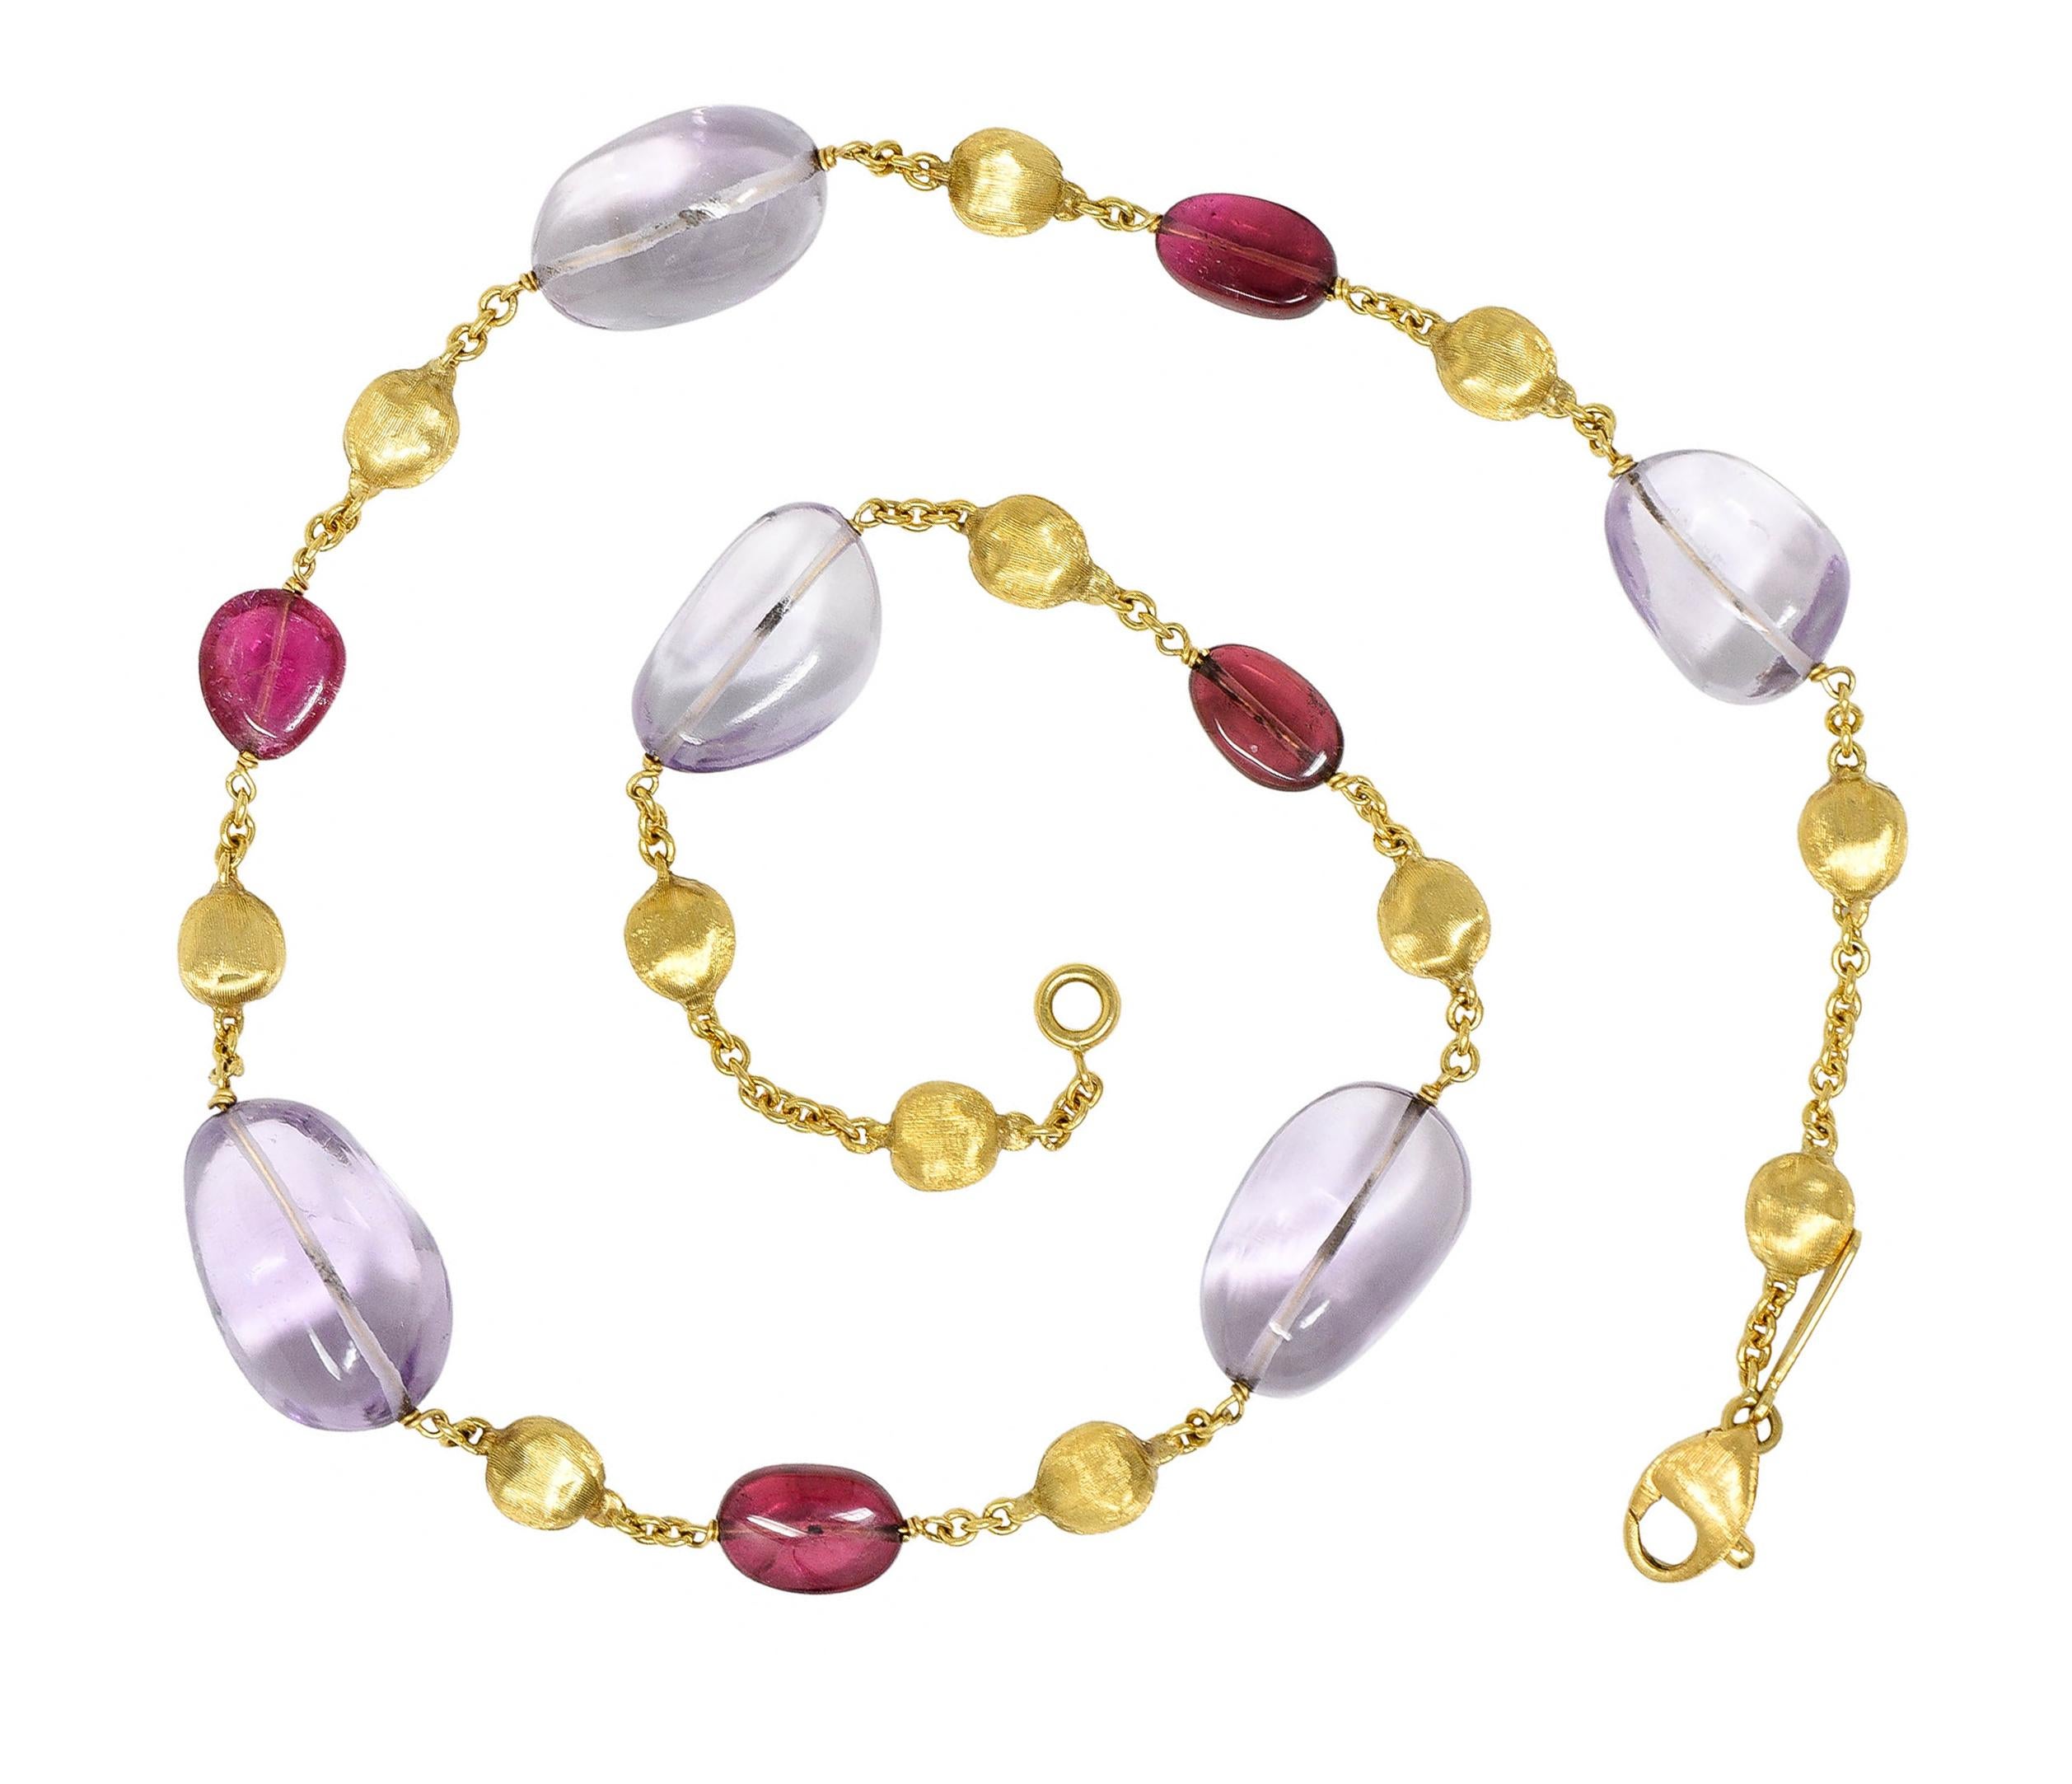 Necklace is comprised of tumbled gemstones alternating with brushed gold nugget stations

Larger tumbled gemstones are amethysts - fairly transparent with light lavender color

Smaller tumbled gemstones are tourmaline - richly pink in color and